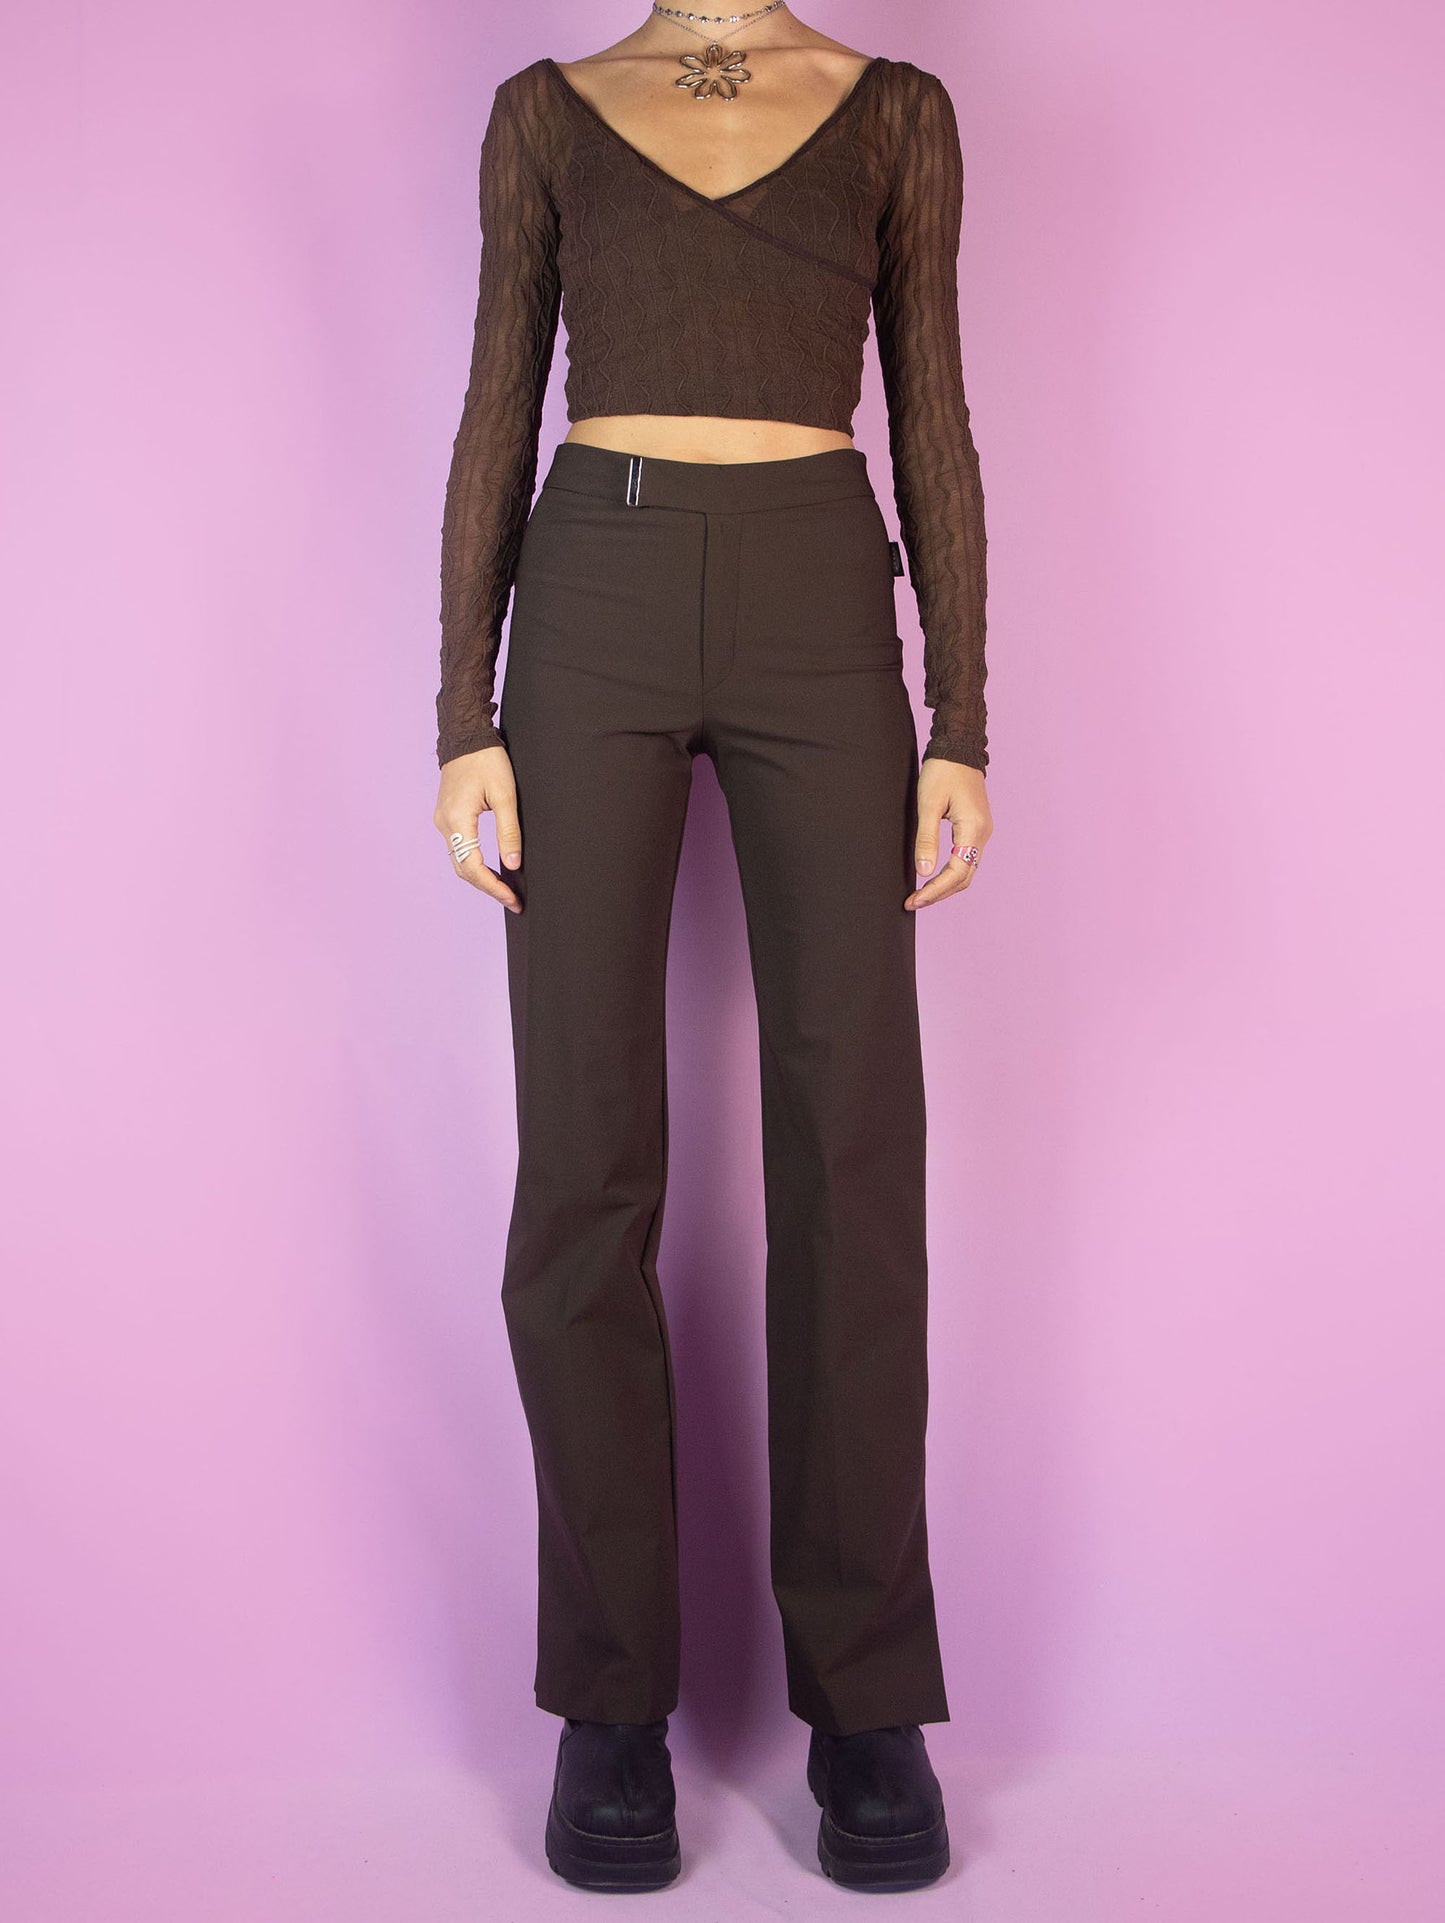 The Y2K Brown Wide Pants are vintage straight pants with elastic fabric, featuring a zipper closure and slits at the hem. Cyber grunge 2000s trousers.